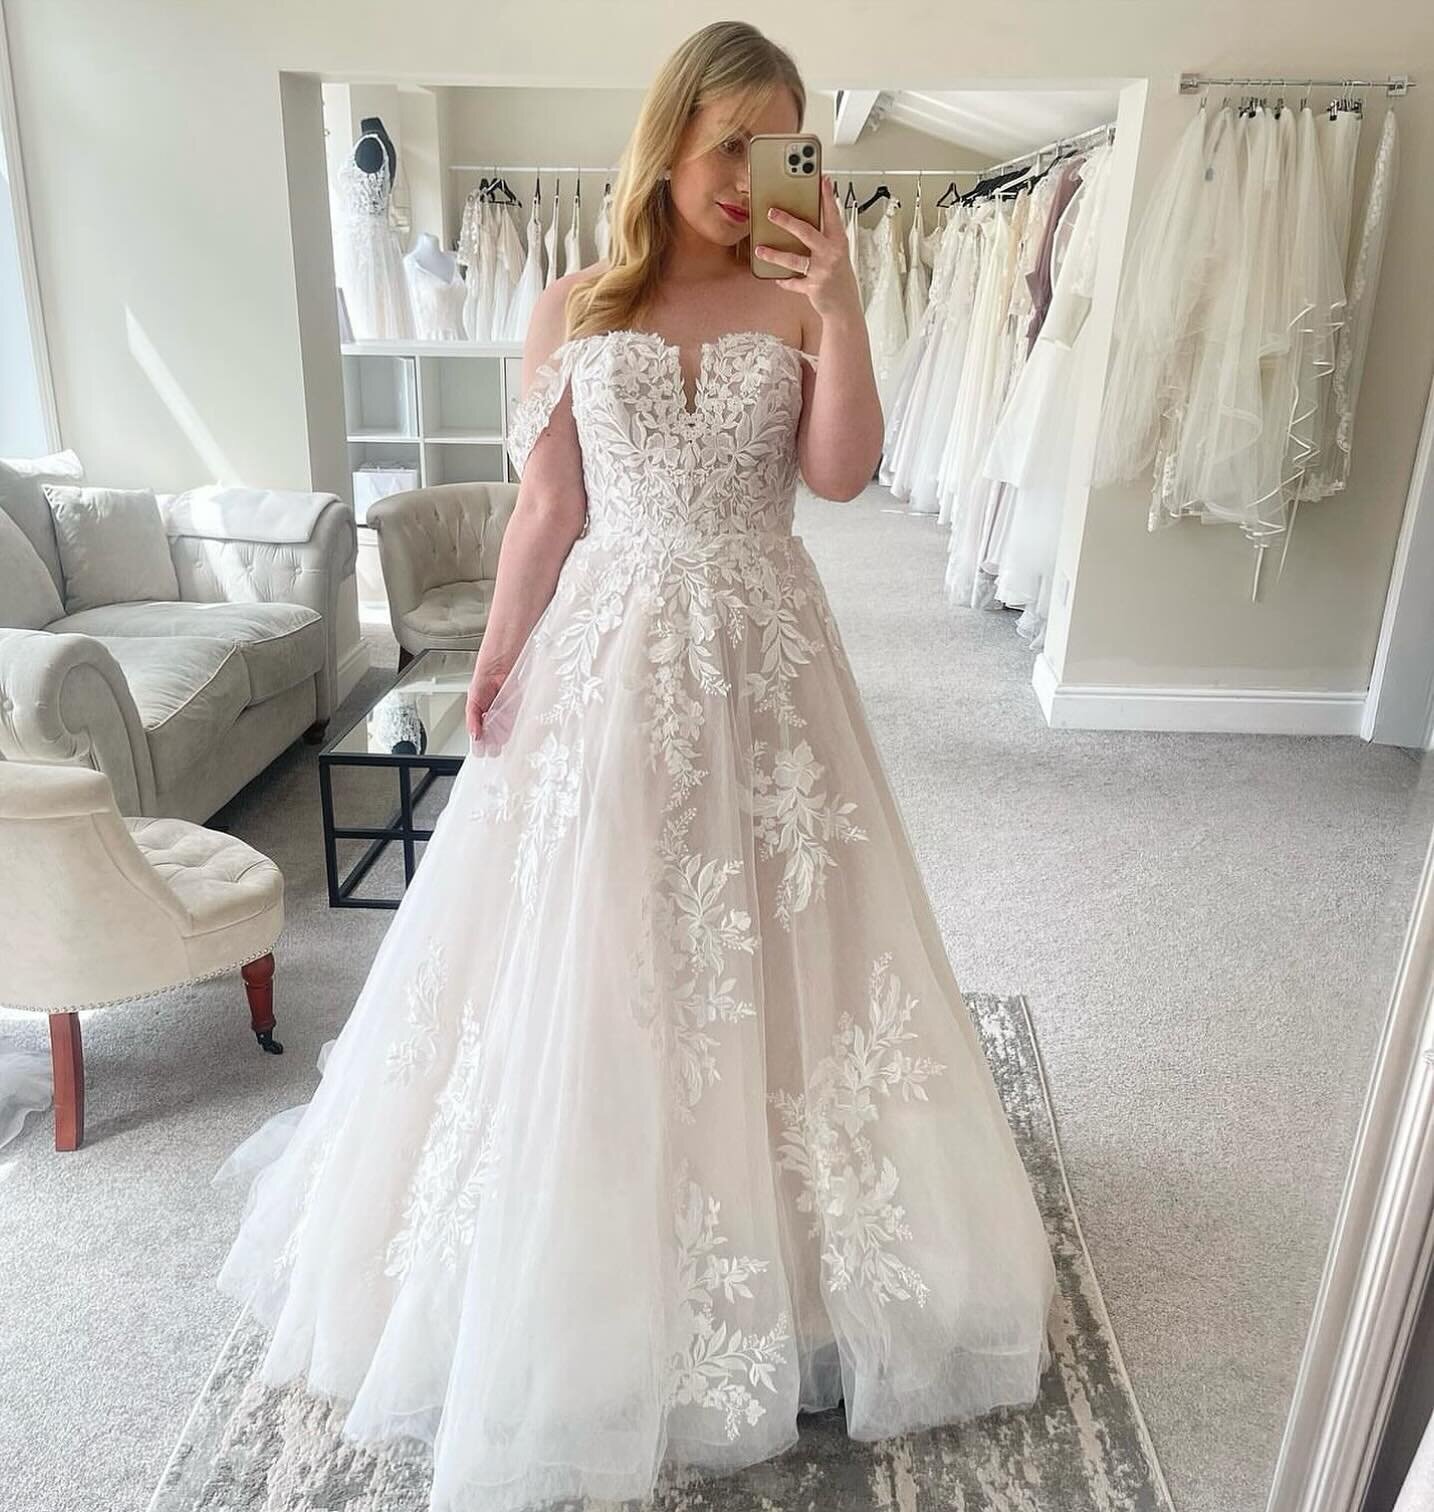 🤍ANSEL 🤍

AISLING | STYLE Y3112

This stunning ball gown is now in our SALE, Size 12. 

Book now to try her on 👰
.
.
.
#ballgown #weddingdresses #weddinggown #2025weddings #sophiatollibride #bridetobe2025 #bridetobe